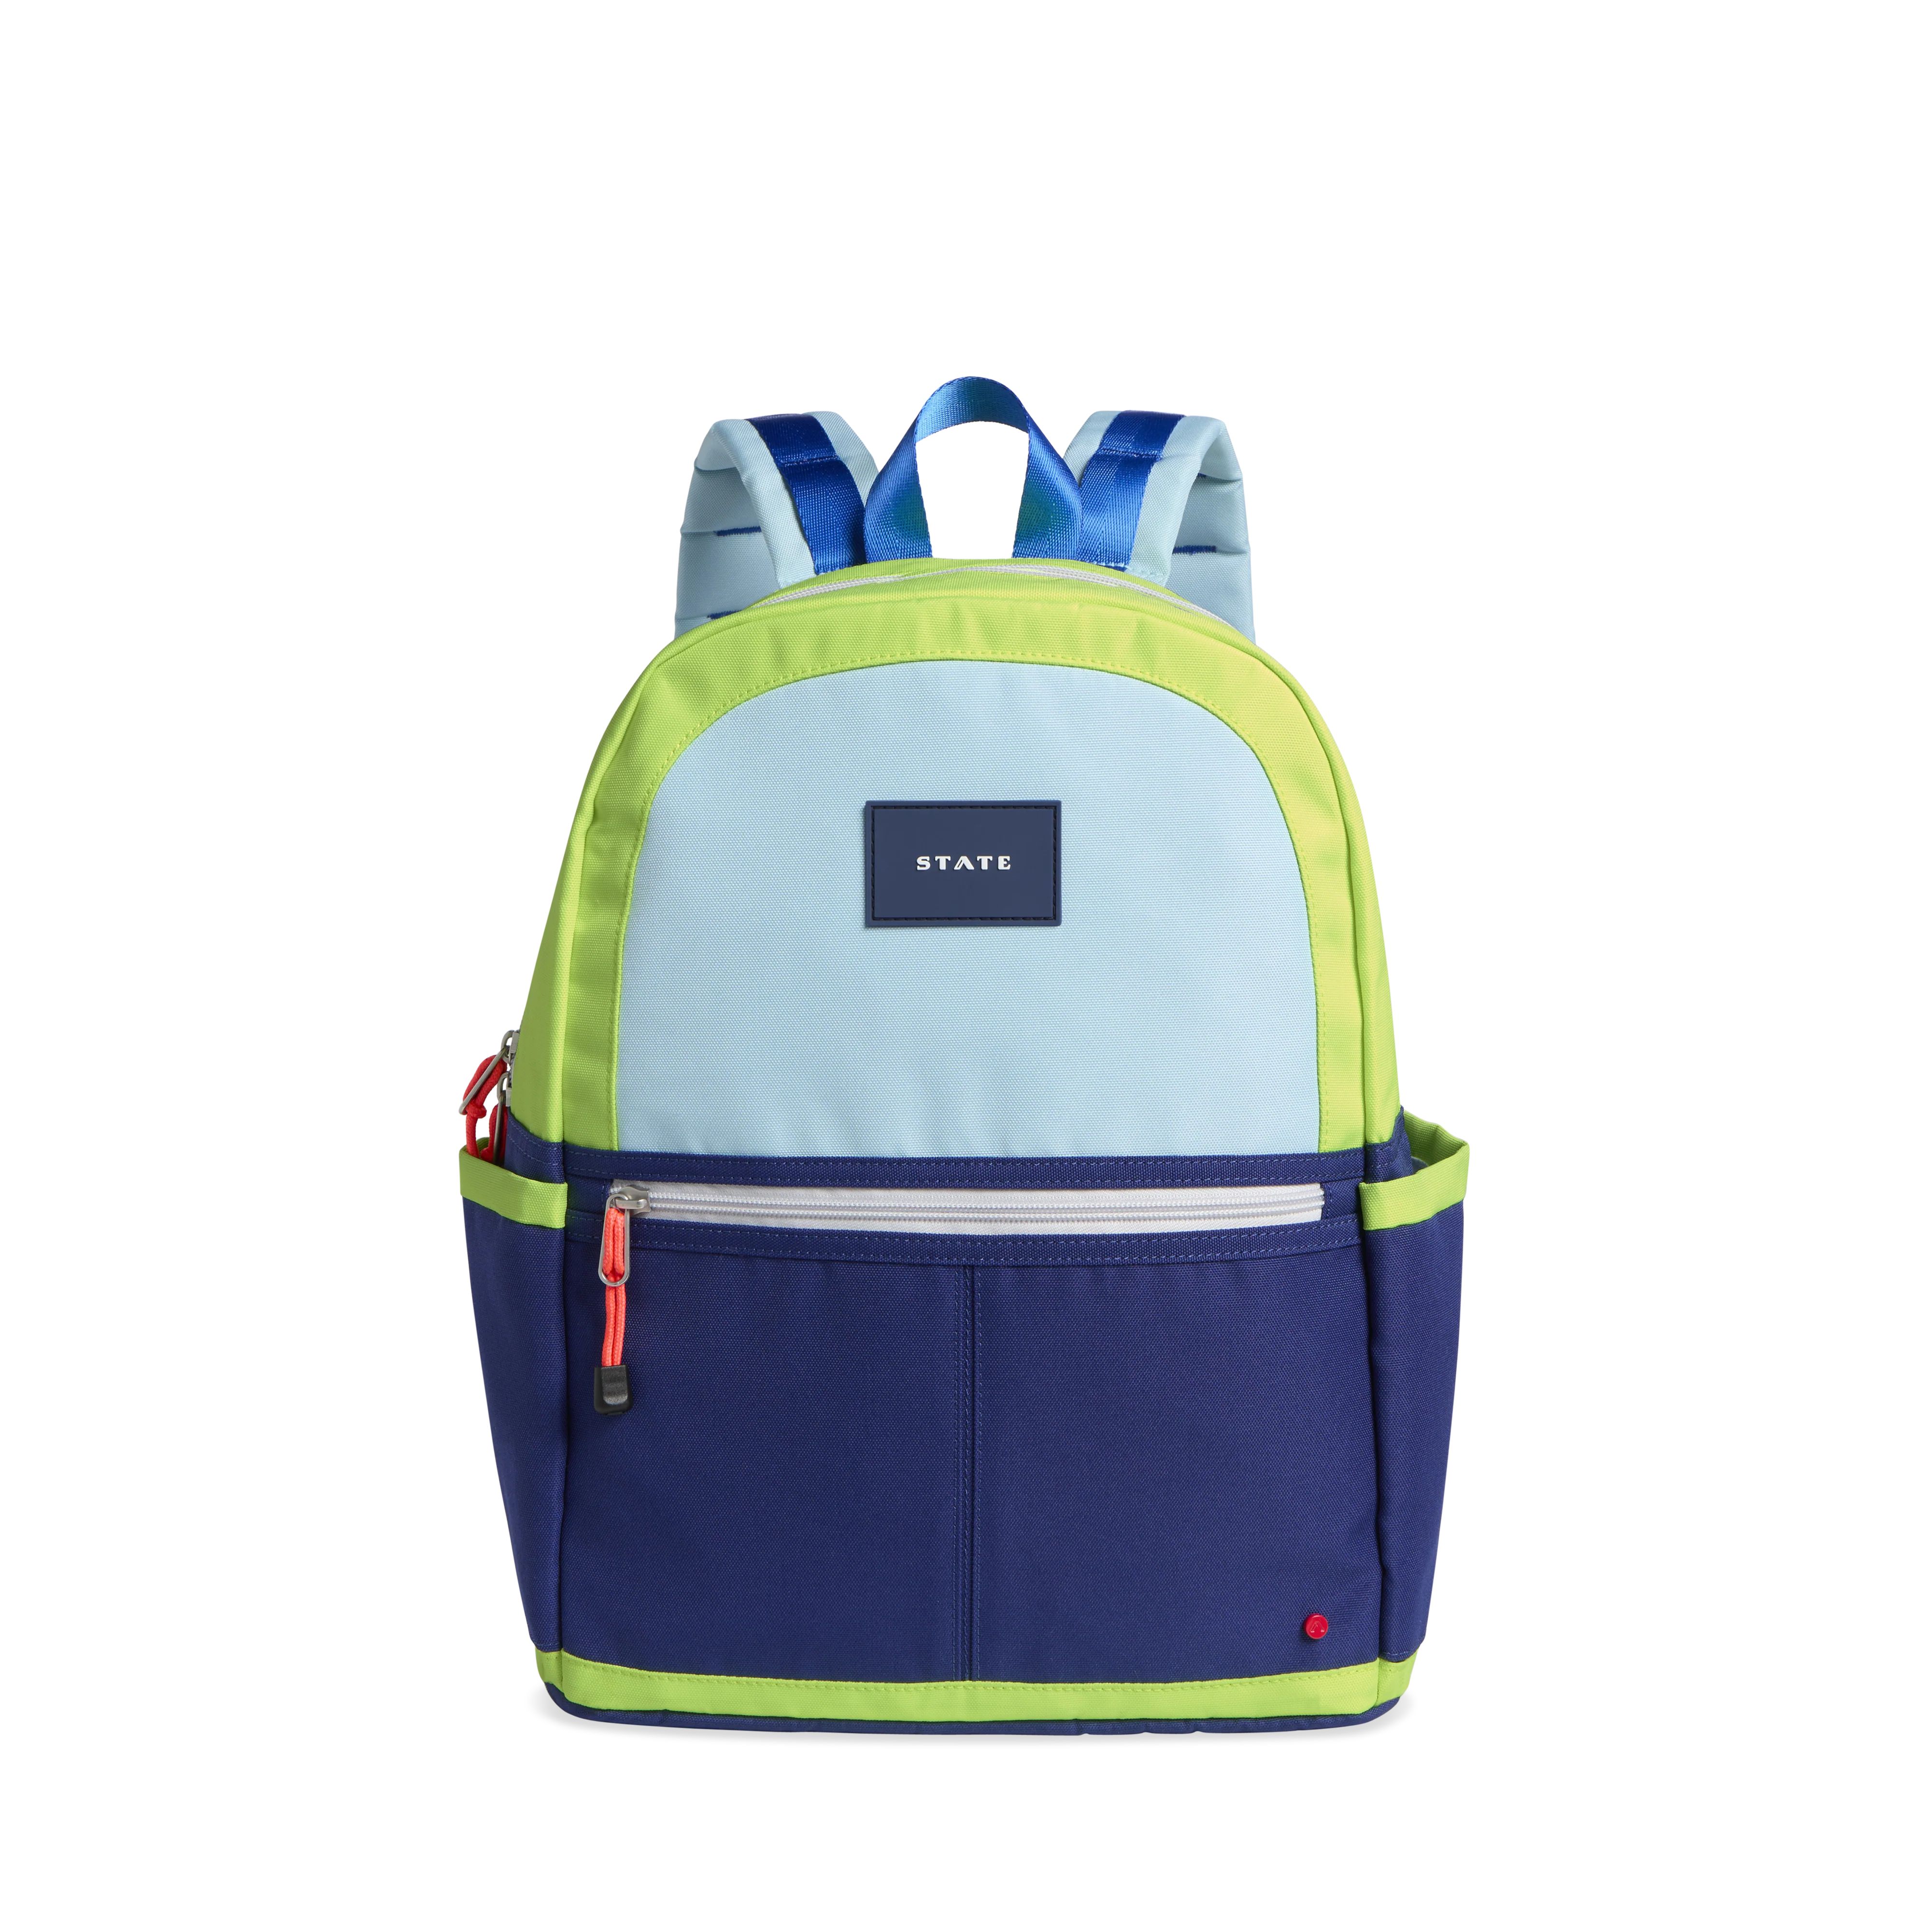 Kane Kids Double Pocket Backpack Color Block Navy/Neon | STATE Bags